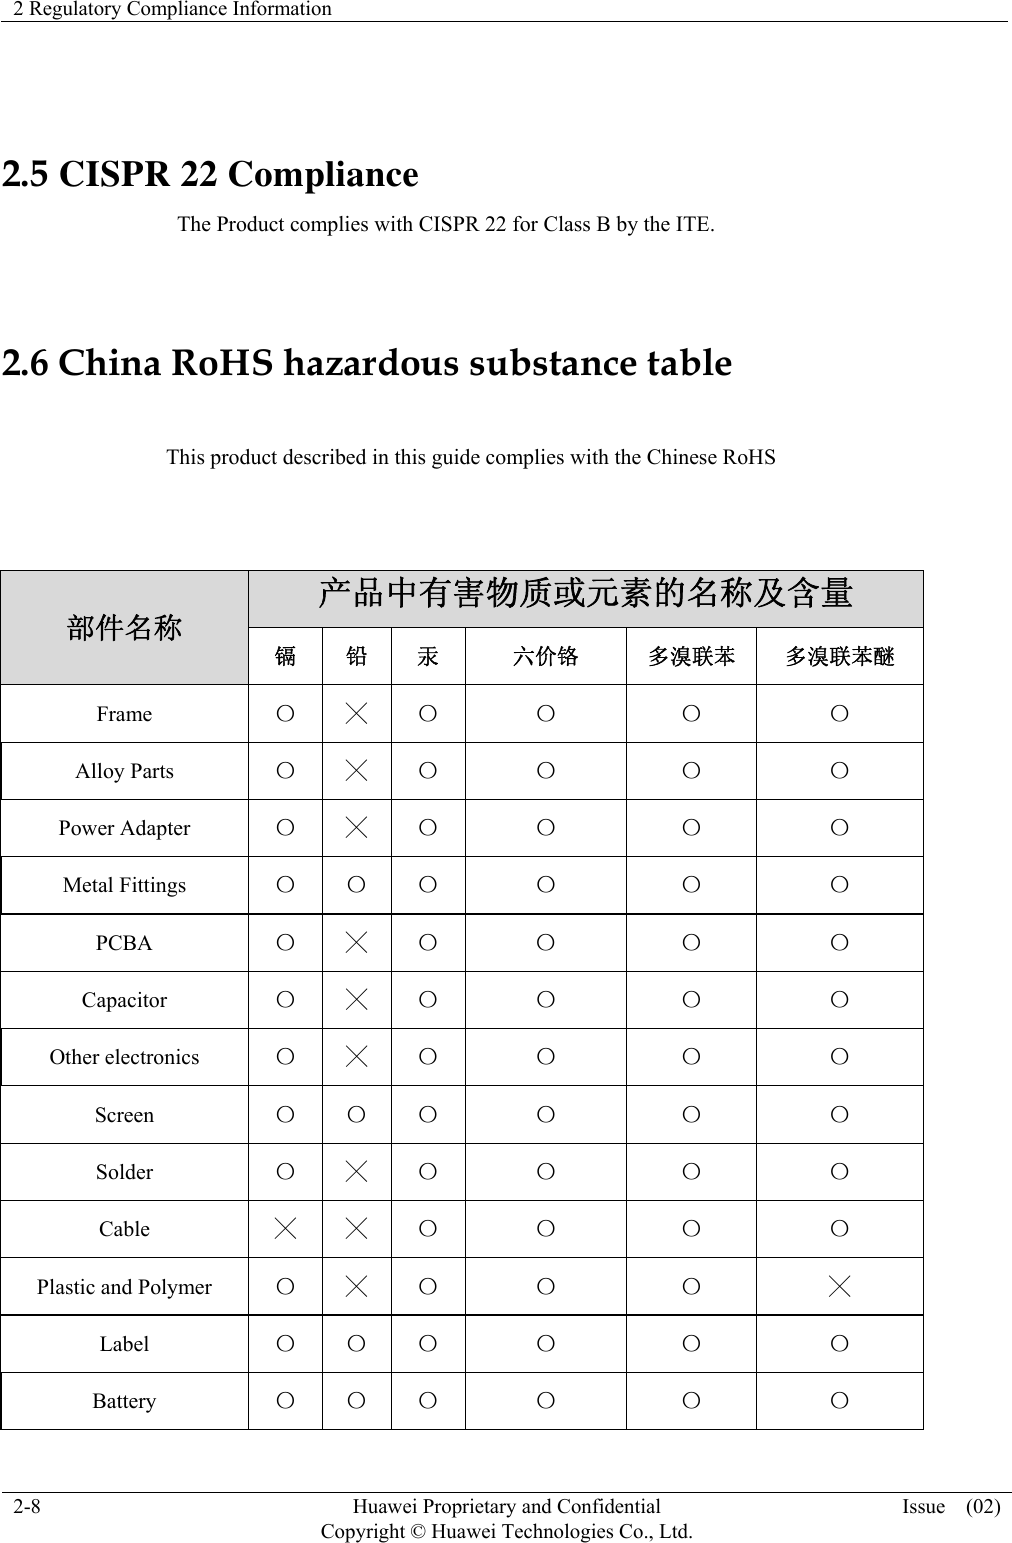 2 Regulatory Compliance Information  2-8  Huawei Proprietary and Confidential         Copyright © Huawei Technologies Co., Ltd.Issue  (02)  2.5 CISPR 22 Compliance                                 The Product complies with CISPR 22 for Class B by the ITE.  2.6 China RoHS hazardous substance table                 This product described in this guide complies with the Chinese RoHS   部件名称 产品中有害物质或元素的名称及含量 镉 铅 汞 六价铬 多溴联苯 多溴联苯醚 Frame  〇 ╳ 〇 〇 〇 〇 Alloy Parts  〇 ╳ 〇 〇 〇 〇 Power Adapter  〇 ╳ 〇 〇 〇 〇 Metal Fittings  〇 〇 〇 〇 〇 〇 PCBA  〇 ╳ 〇 〇 〇 〇 Capacitor  〇 ╳ 〇 〇 〇 〇 Other electronics  〇 ╳ 〇 〇 〇 〇 Screen  〇 〇 〇 〇 〇 〇 Solder  〇 ╳ 〇 〇 〇 〇 Cable ╳ ╳ 〇 〇 〇 〇 Plastic and Polymer  〇 ╳ 〇 〇 〇 ╳ Label  〇 〇 〇 〇 〇 〇 Battery  〇 〇 〇 〇 〇 〇 